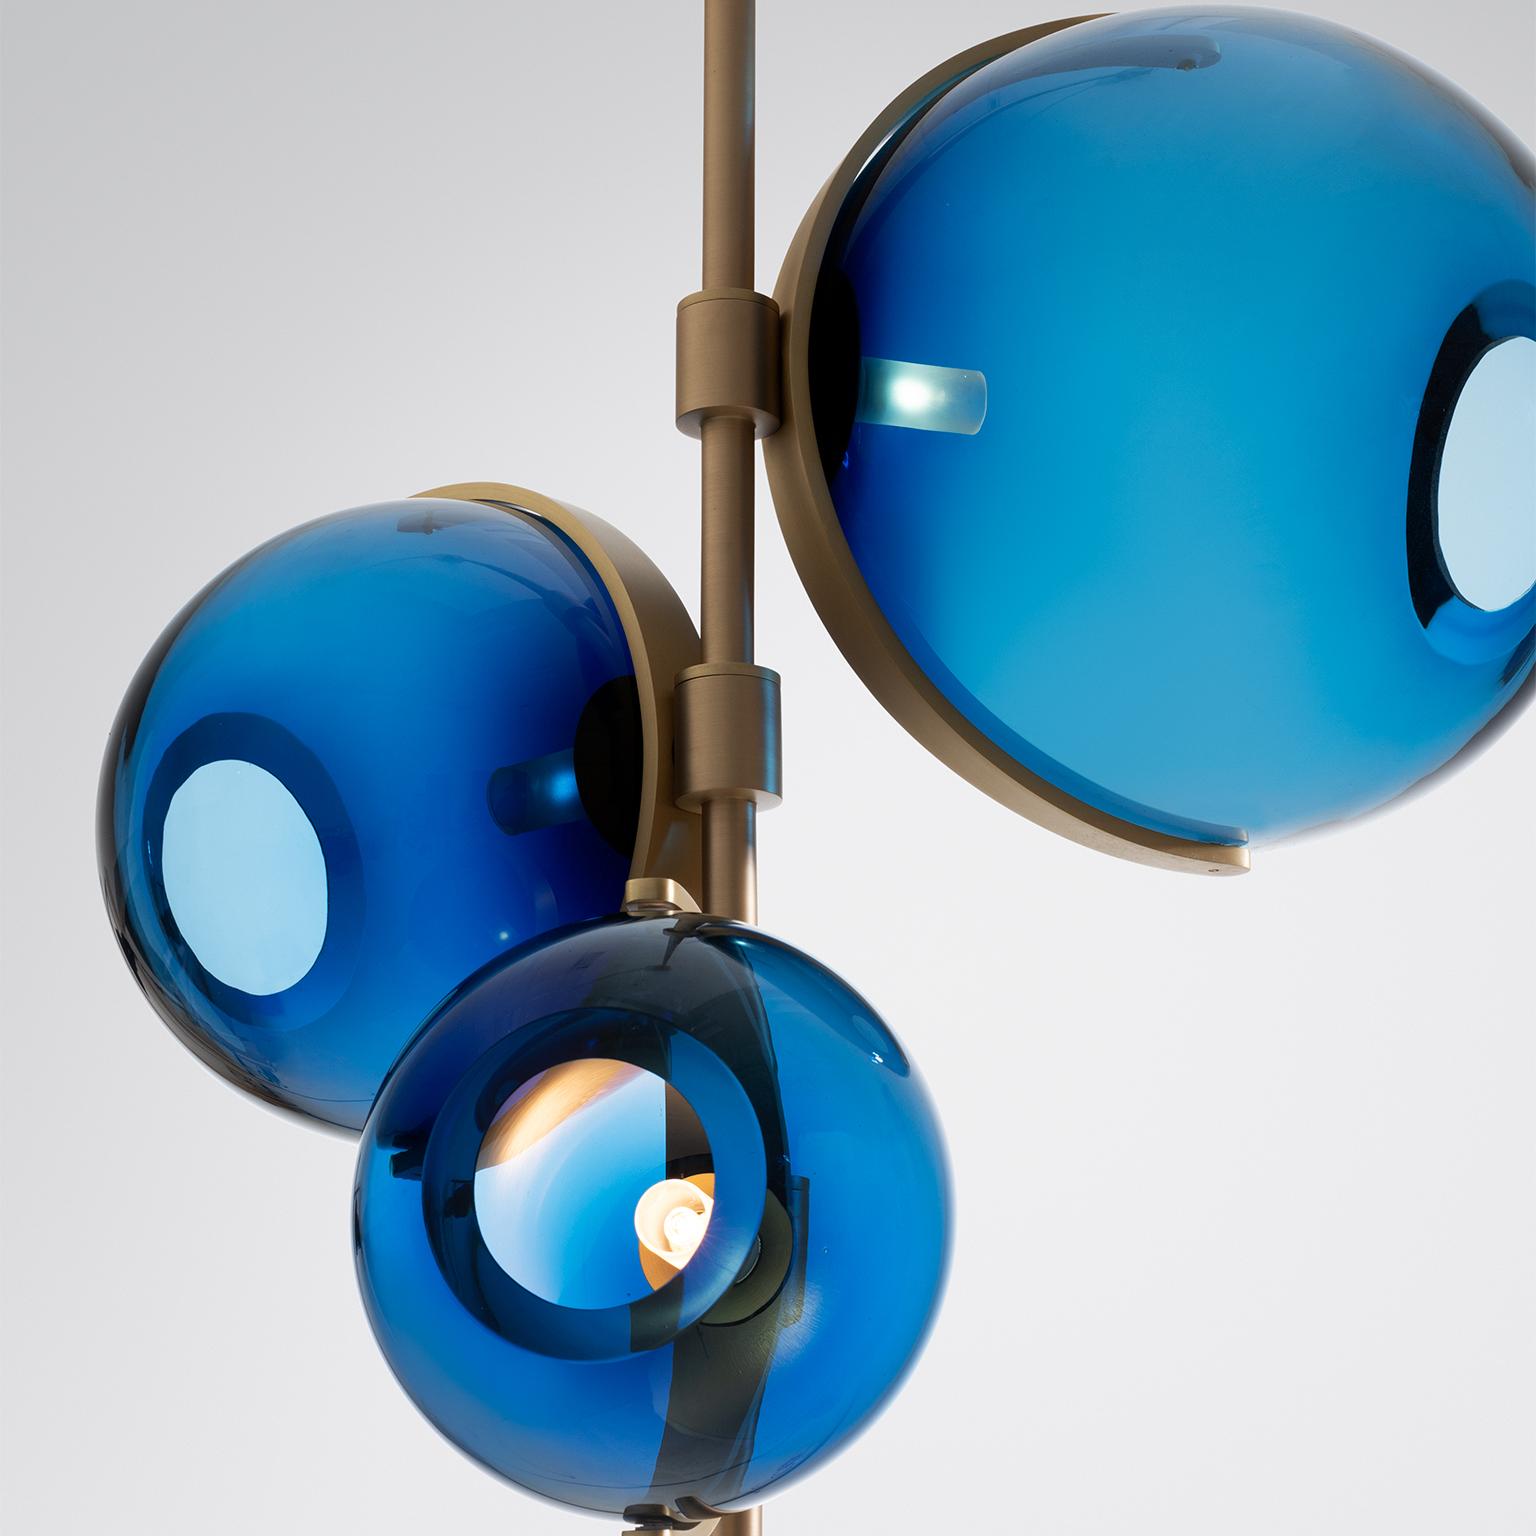 Holly Hunt Another day chandelier with brass & glass by Damien Langlois-Meurinne

Additional Information:
Materials: Brass, glass
Frame finish: Brushed brass satin varnish
Glass finish: Steel blue glass
Diffuser: Glass
Illumination: Socket